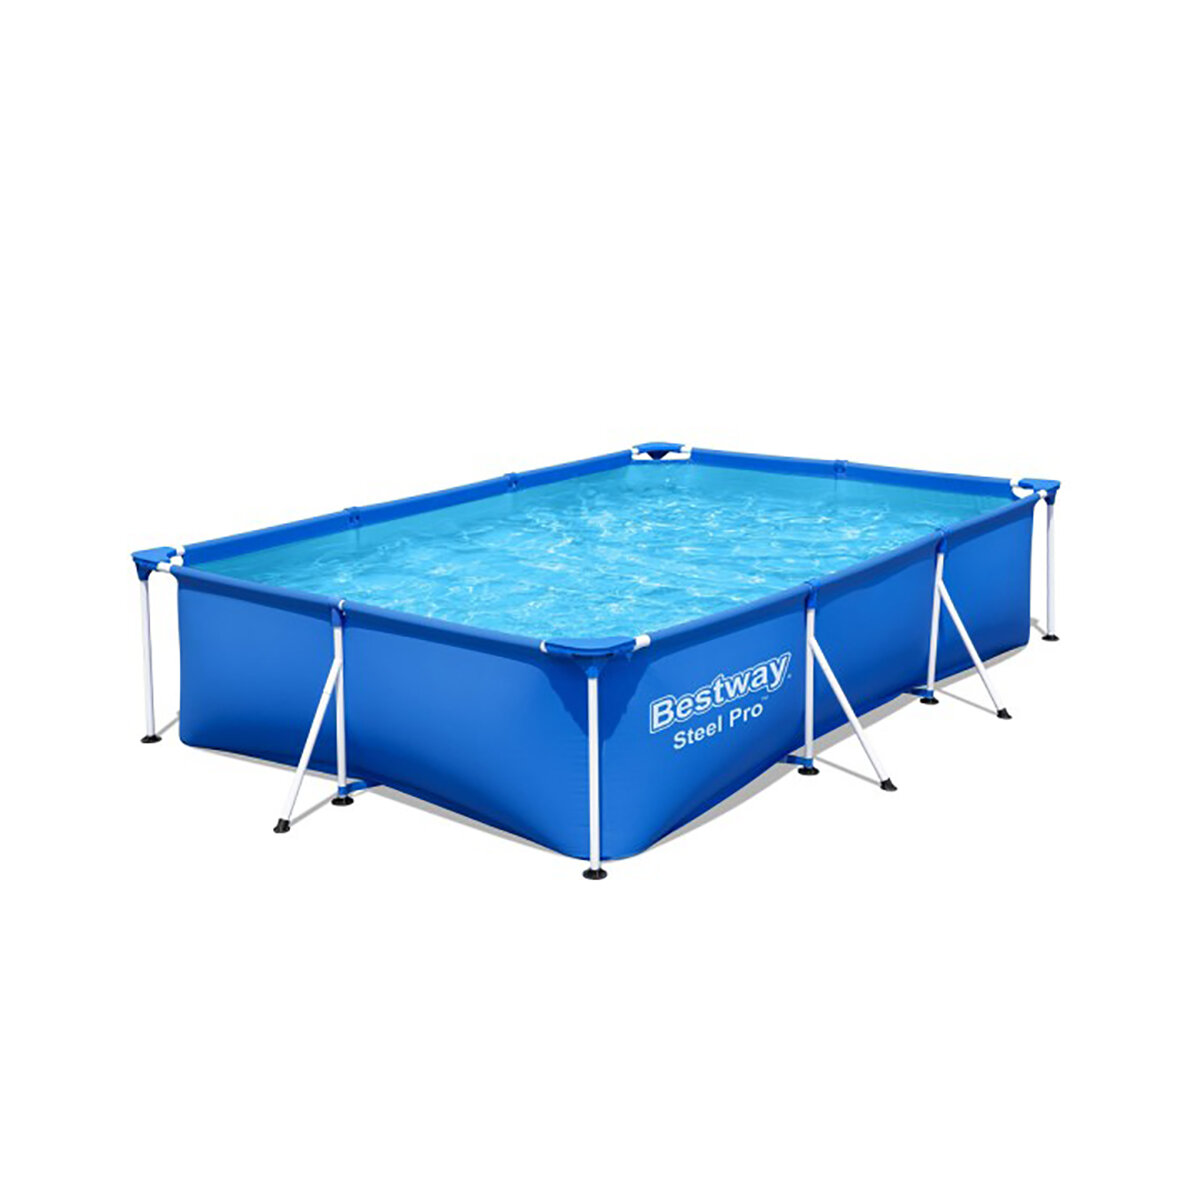 Bestway Inflatables & Material Corp   Steel Pro, 300 x 201 x 66 , 3300 